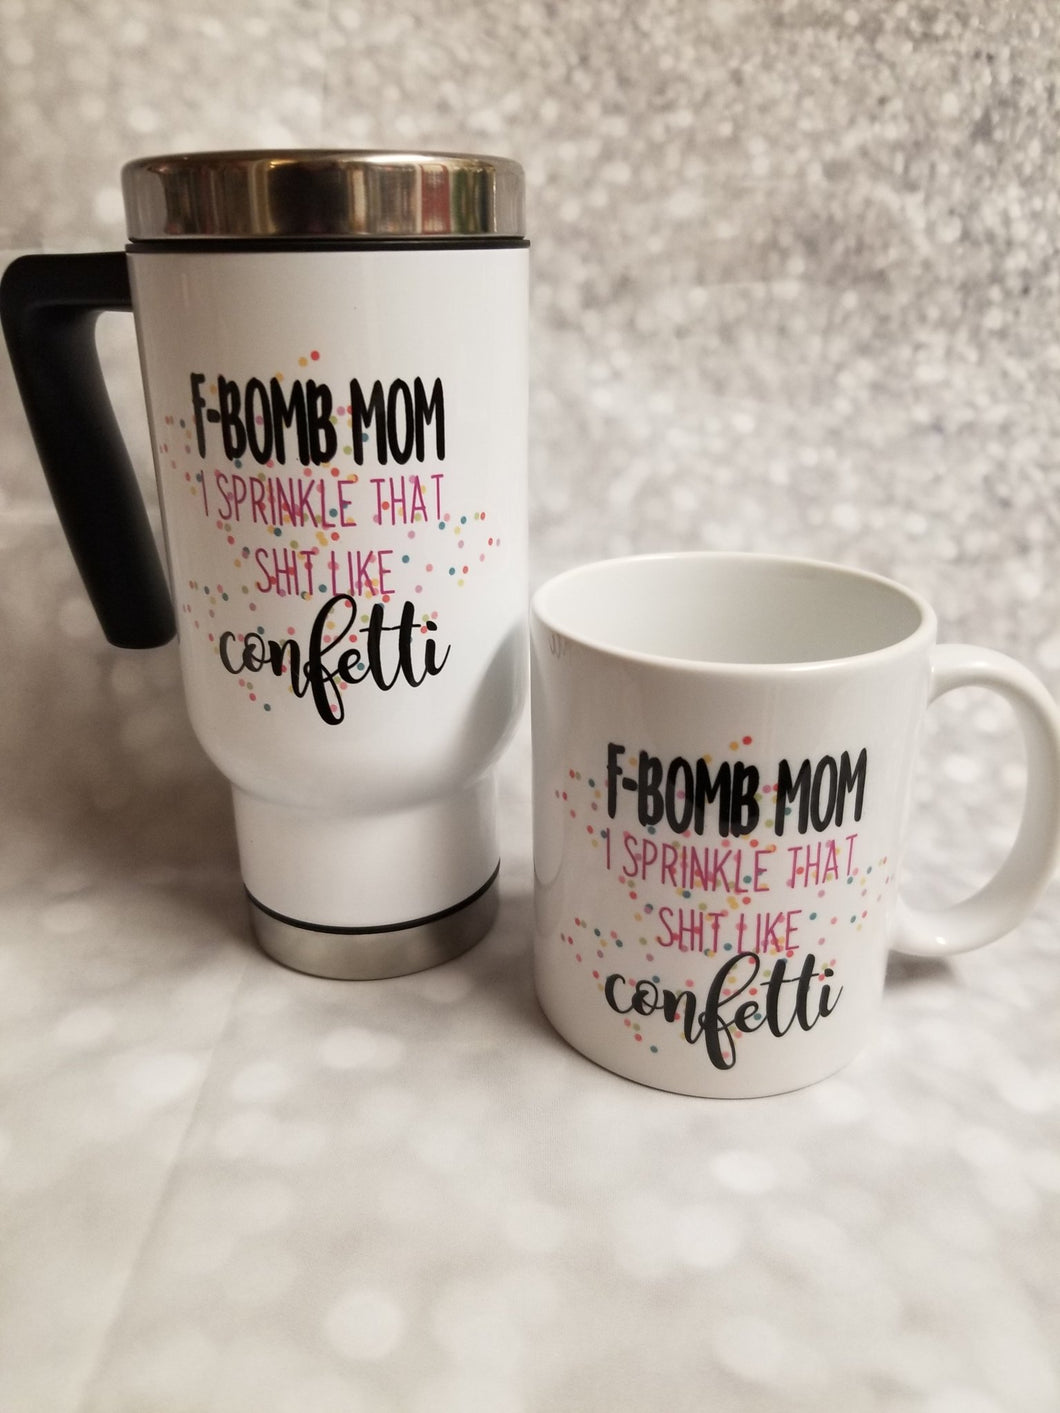 F bomb mom mug - My Other Child / Blooms n' Rooms